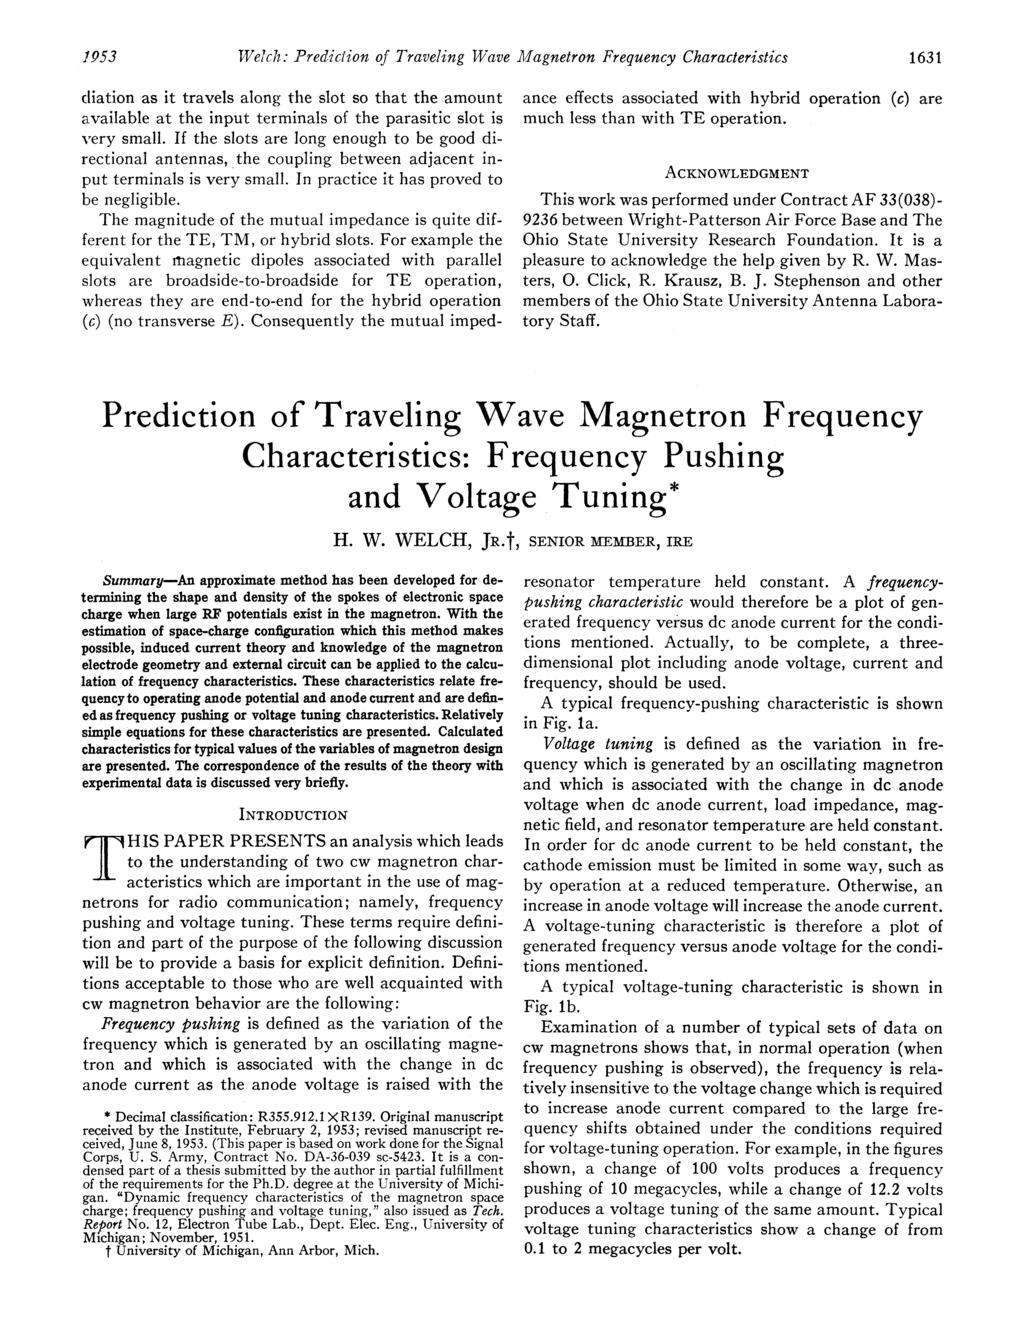 19p53 Welch: Prediction of Traveling Wave Magnetron Frequency Characteristics 1631 cliation as it travels along the slot so that the amount available at the input terminals of the parasitic slot is